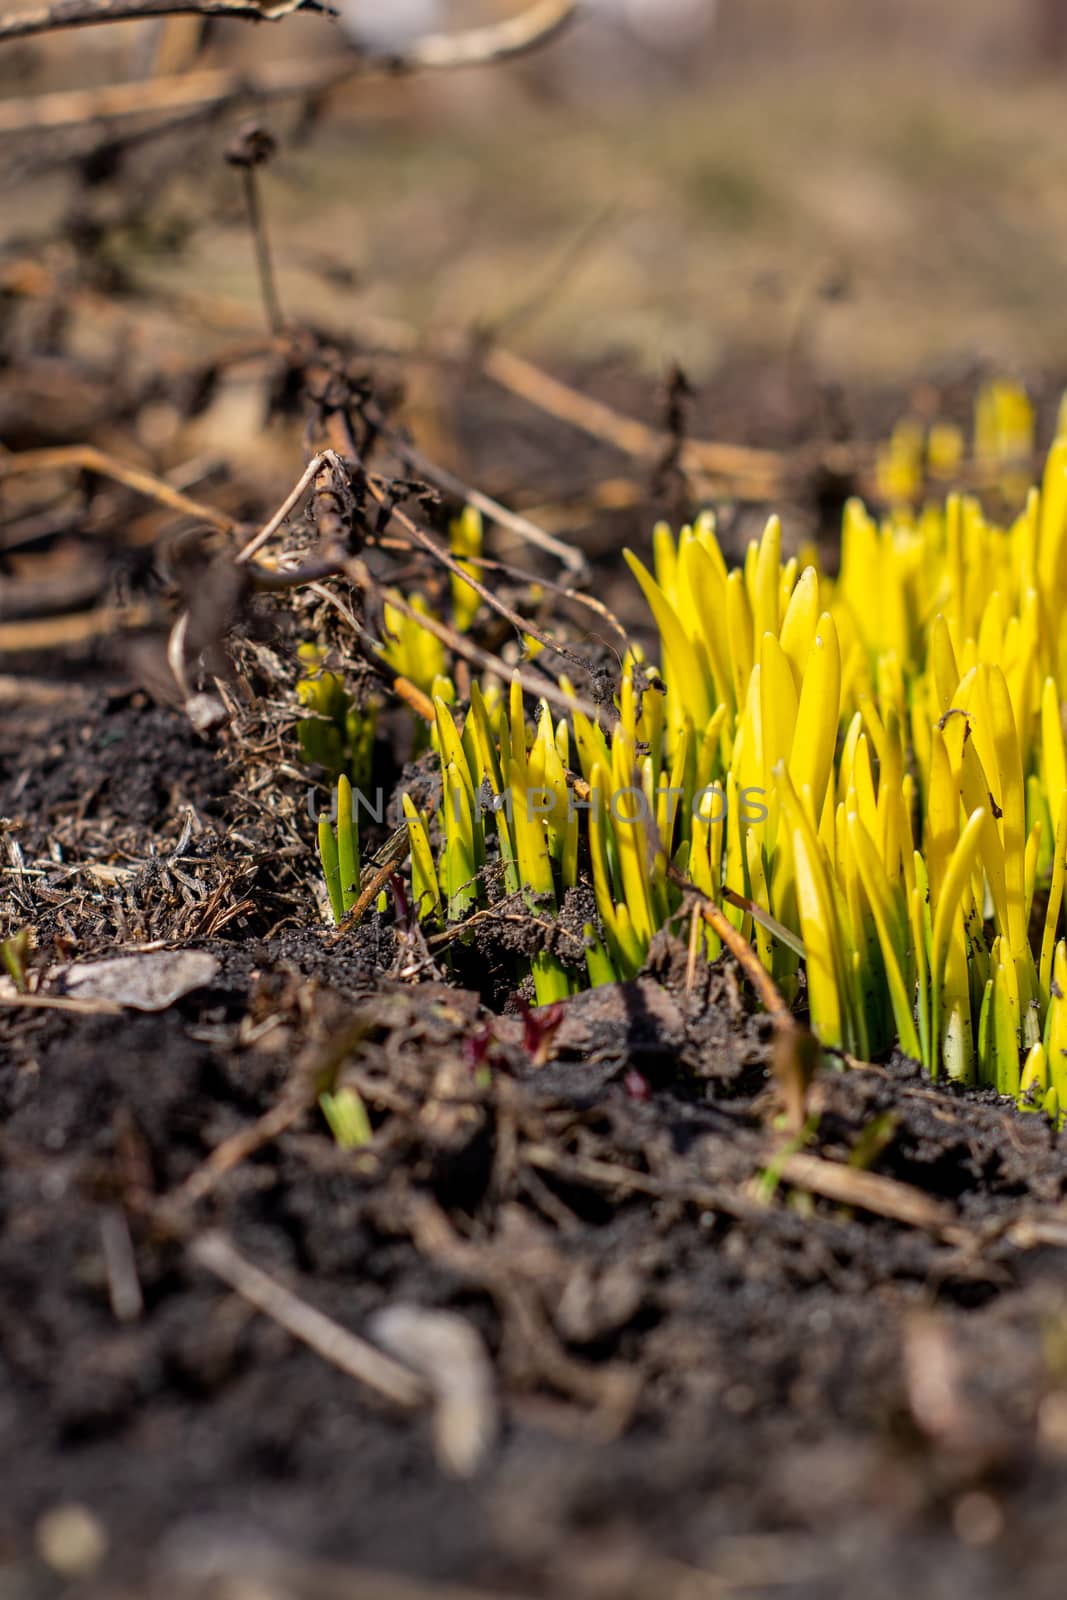 The green shoots of Daffodils in the spring. Daffodils sprout through the ground in spring.